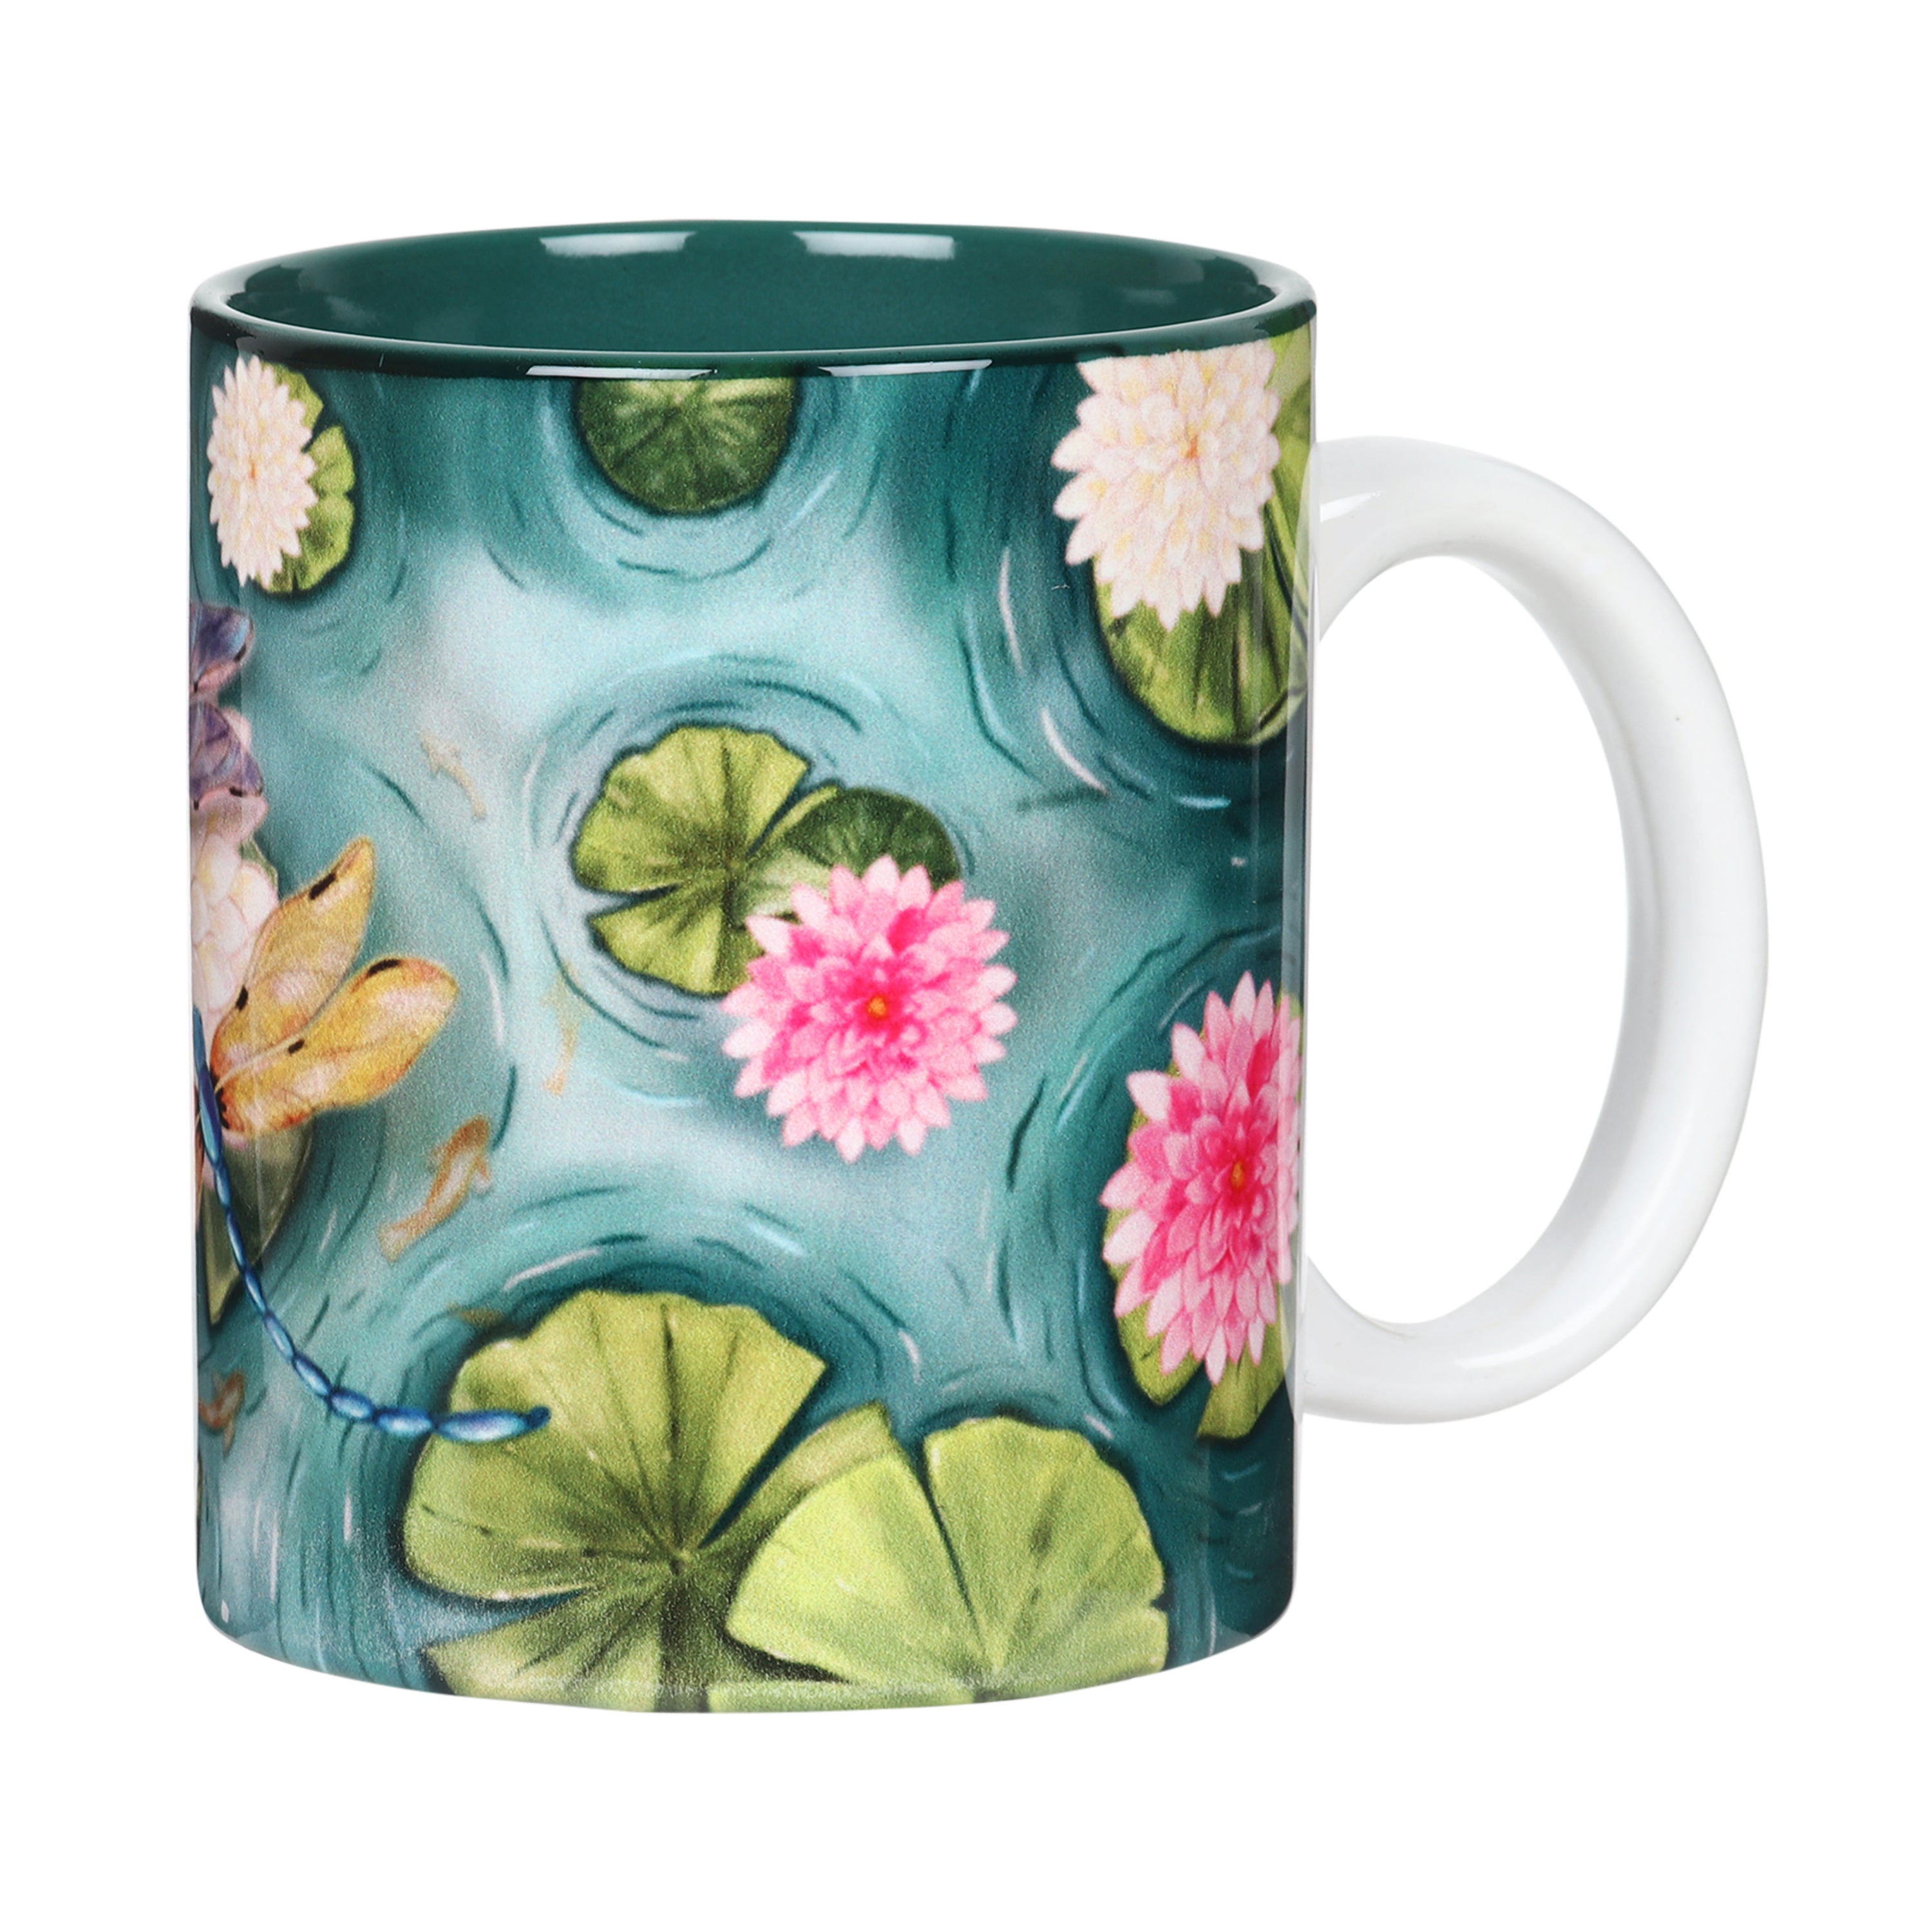 Mugs - The Water Tale of Dragonflies